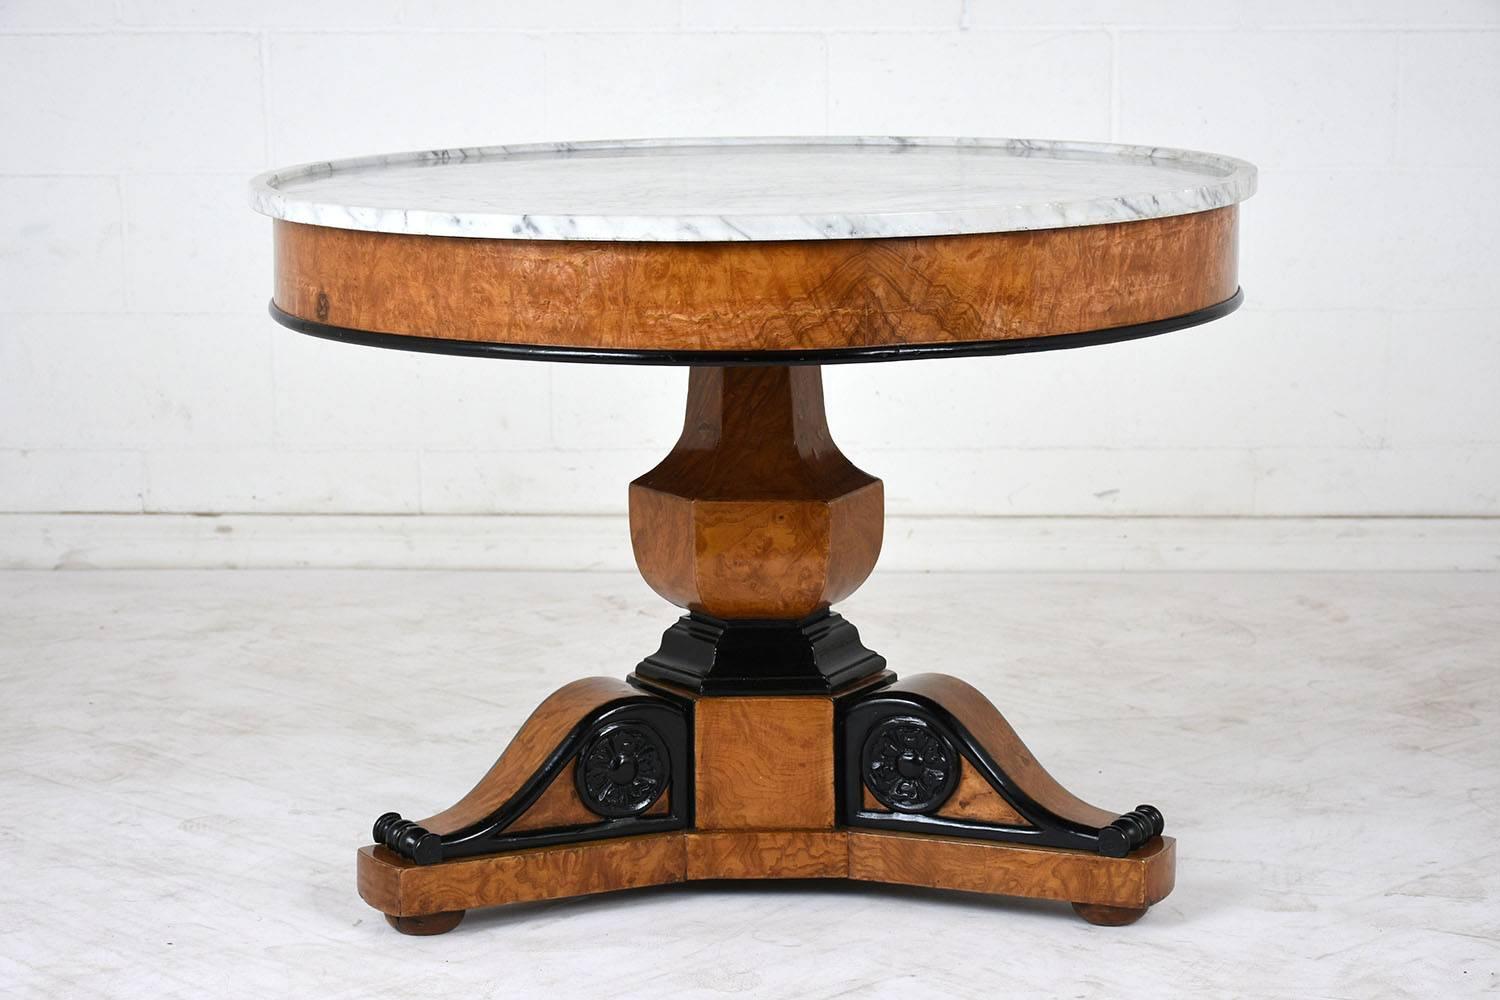 Polished Mid-19th Century French Empire Centre Table